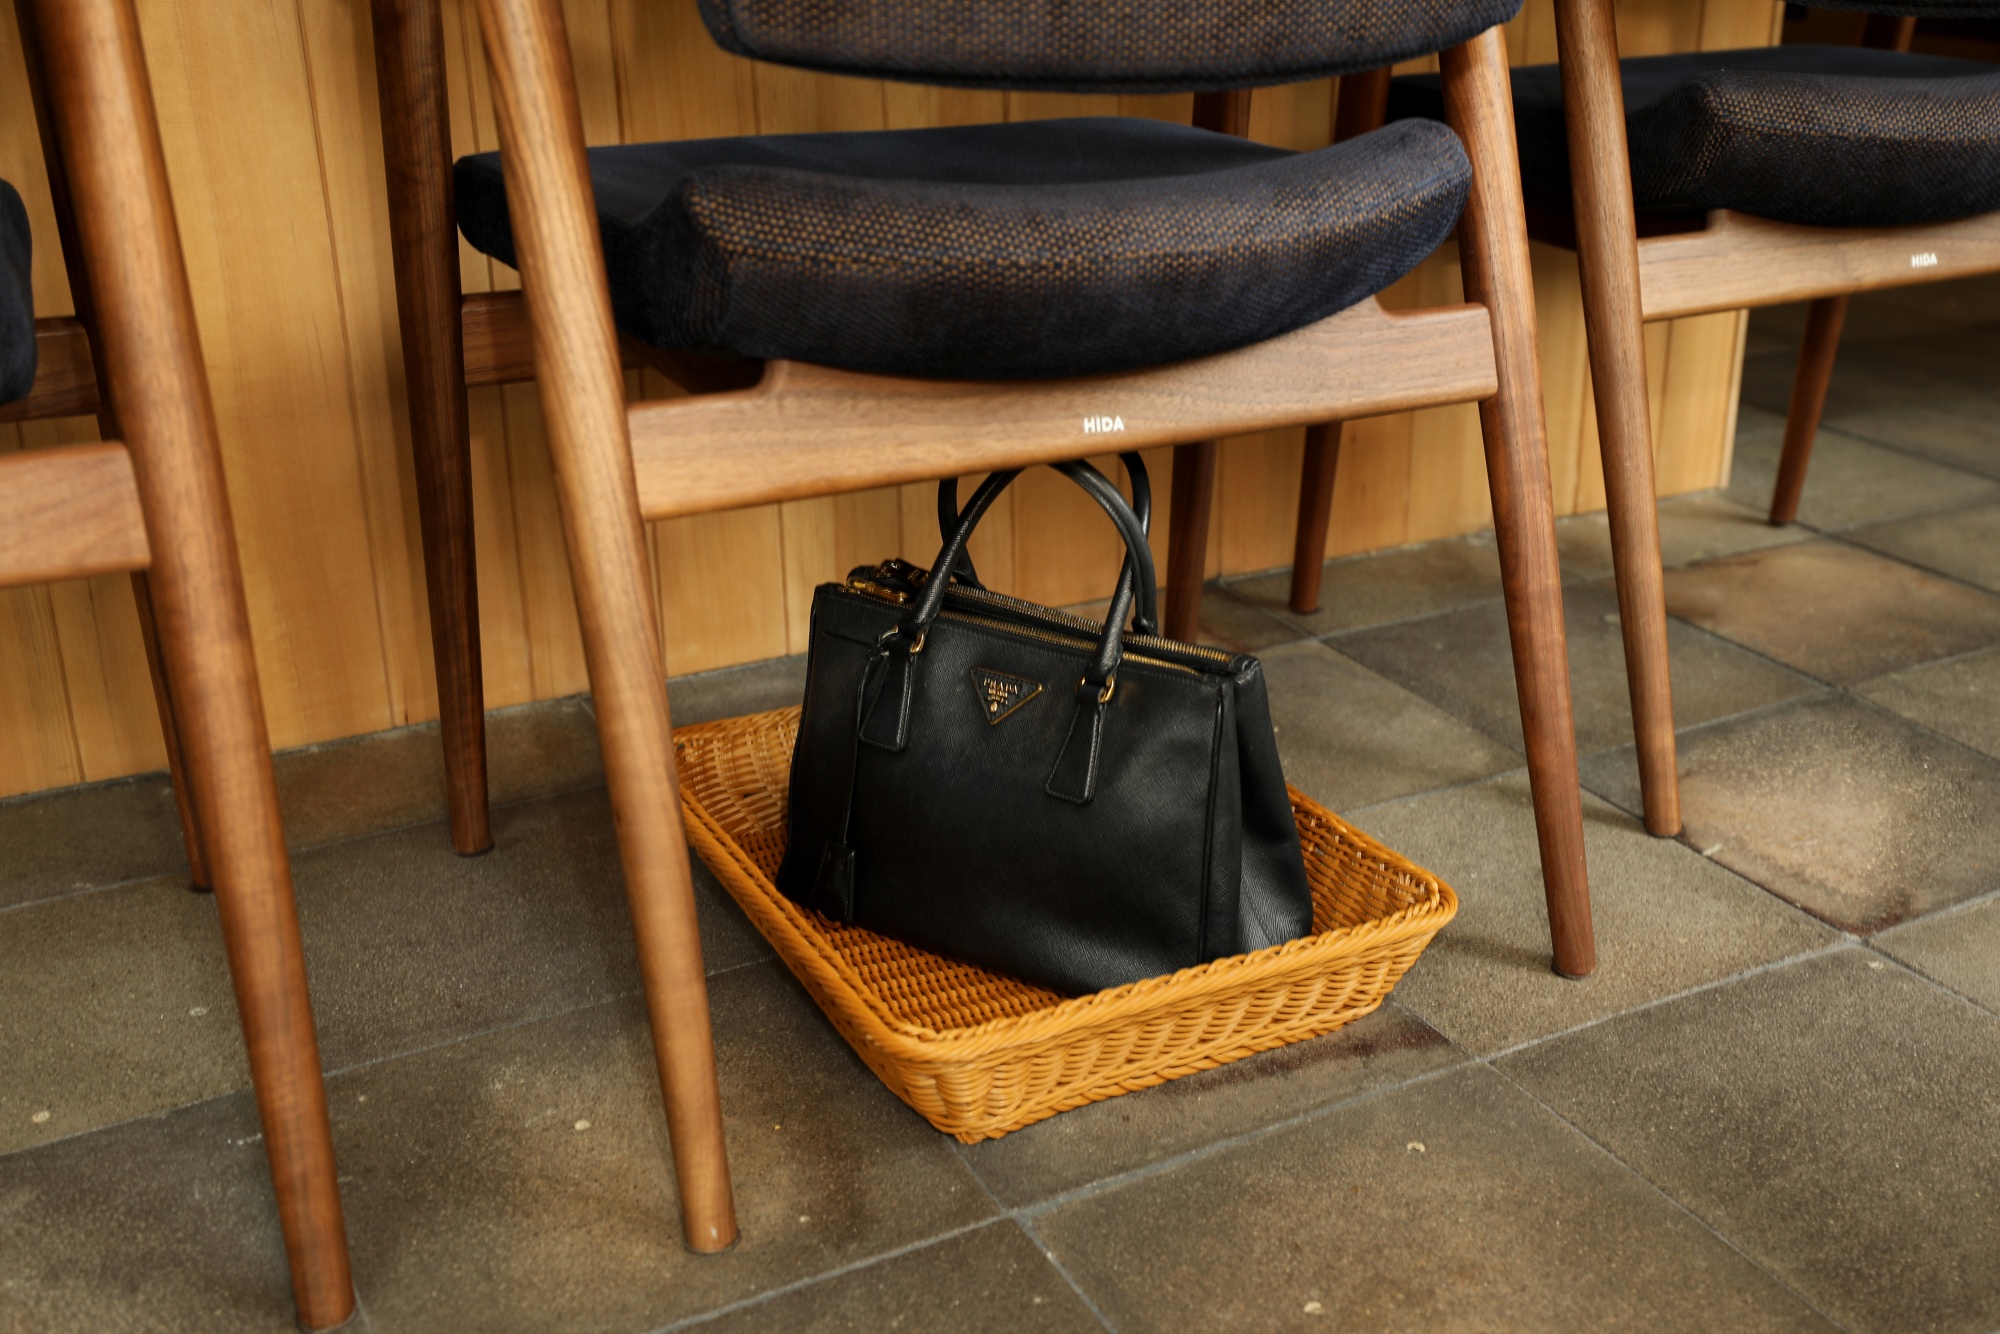 Luxury Purse Stools Are Grabbing More Real Estate in Restaurants - Bloomberg